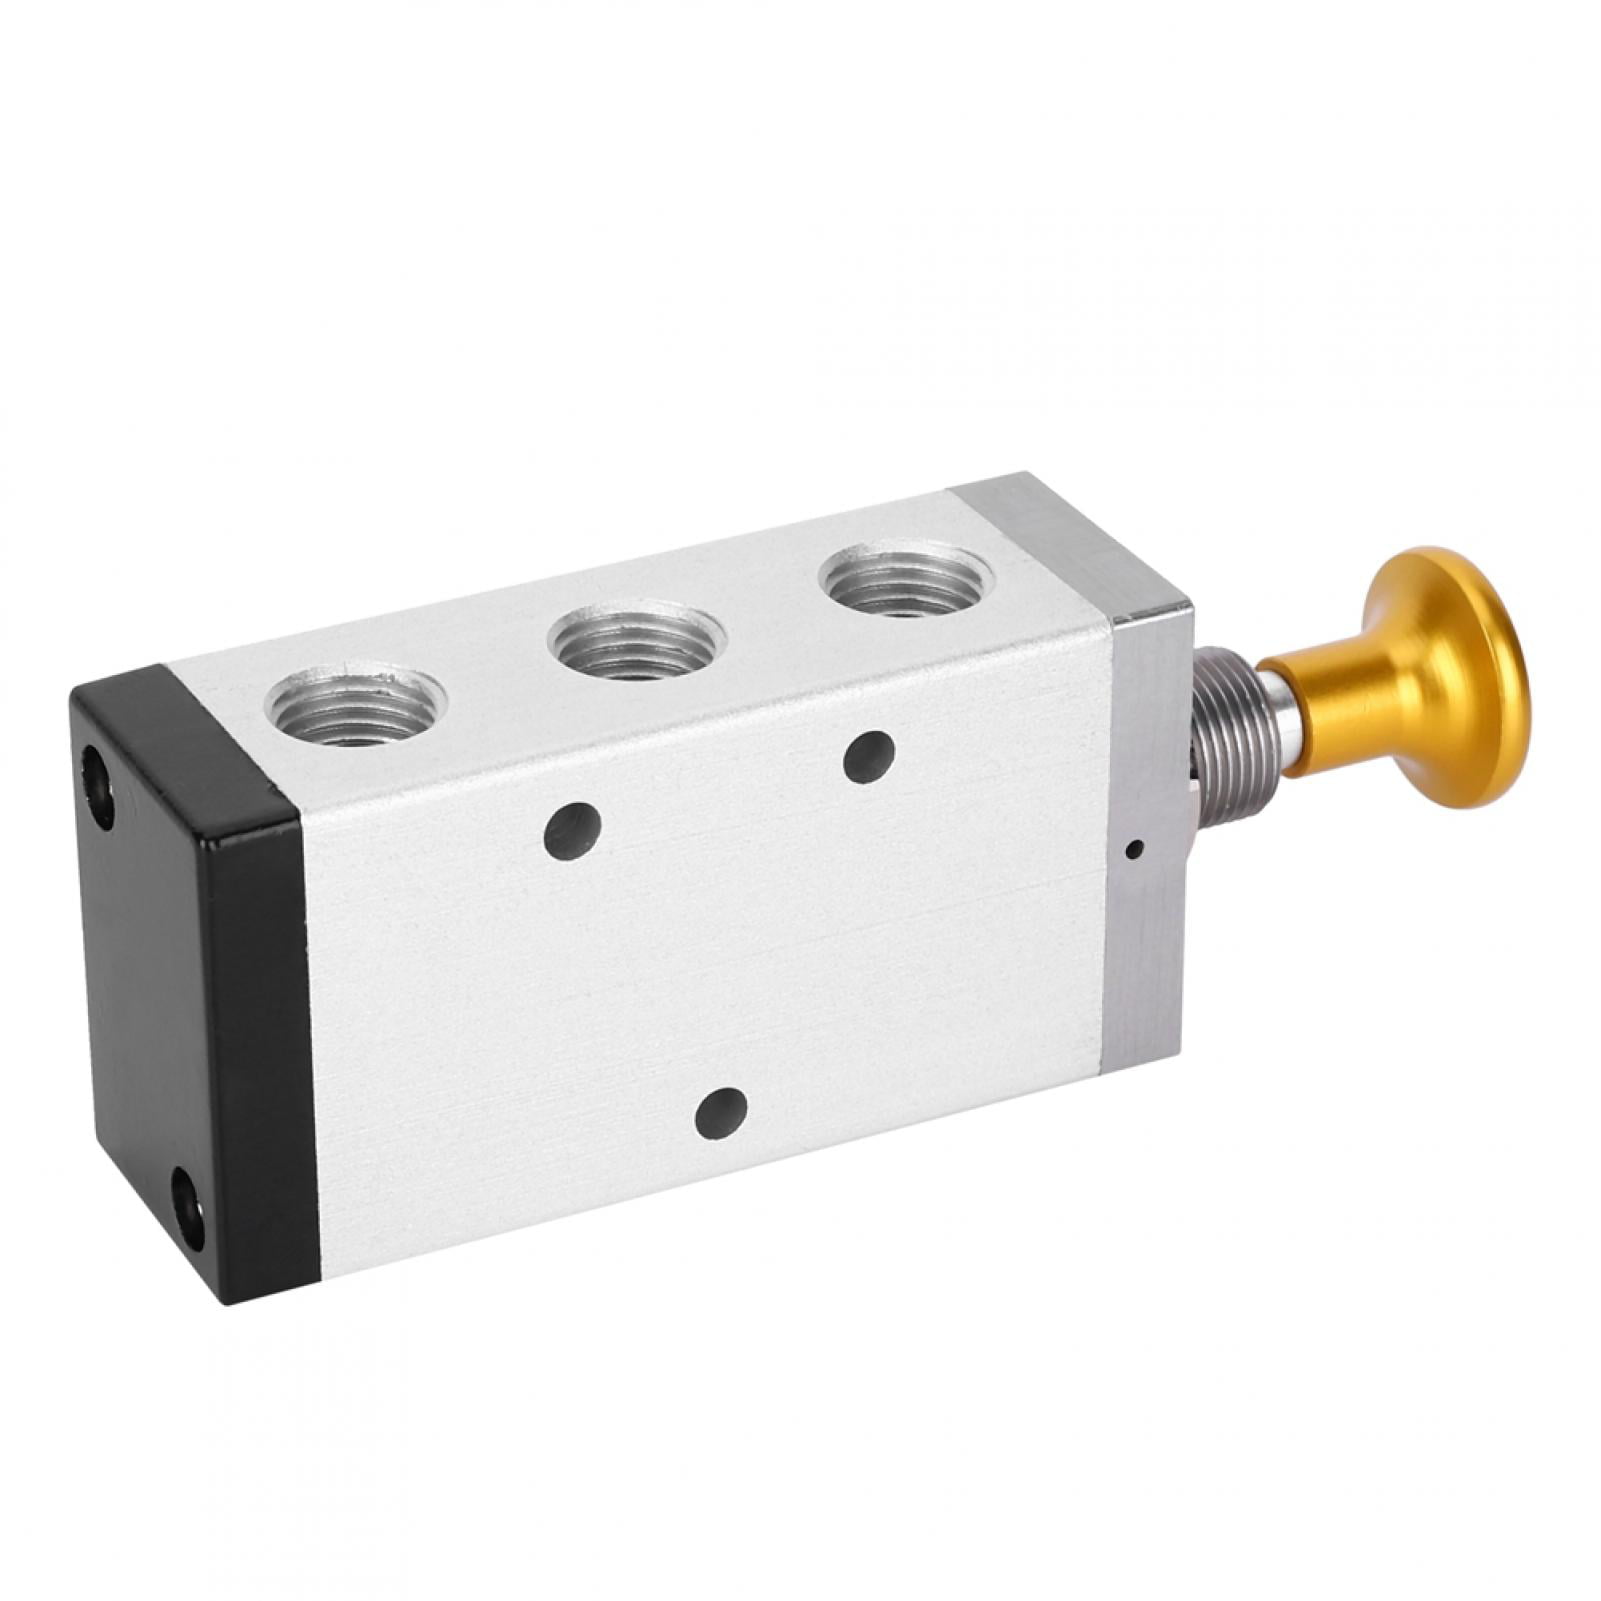 G3/8-Inch Five-Way Two-Position Hand Valve G1/4-Inch Switch Button 4R310-10